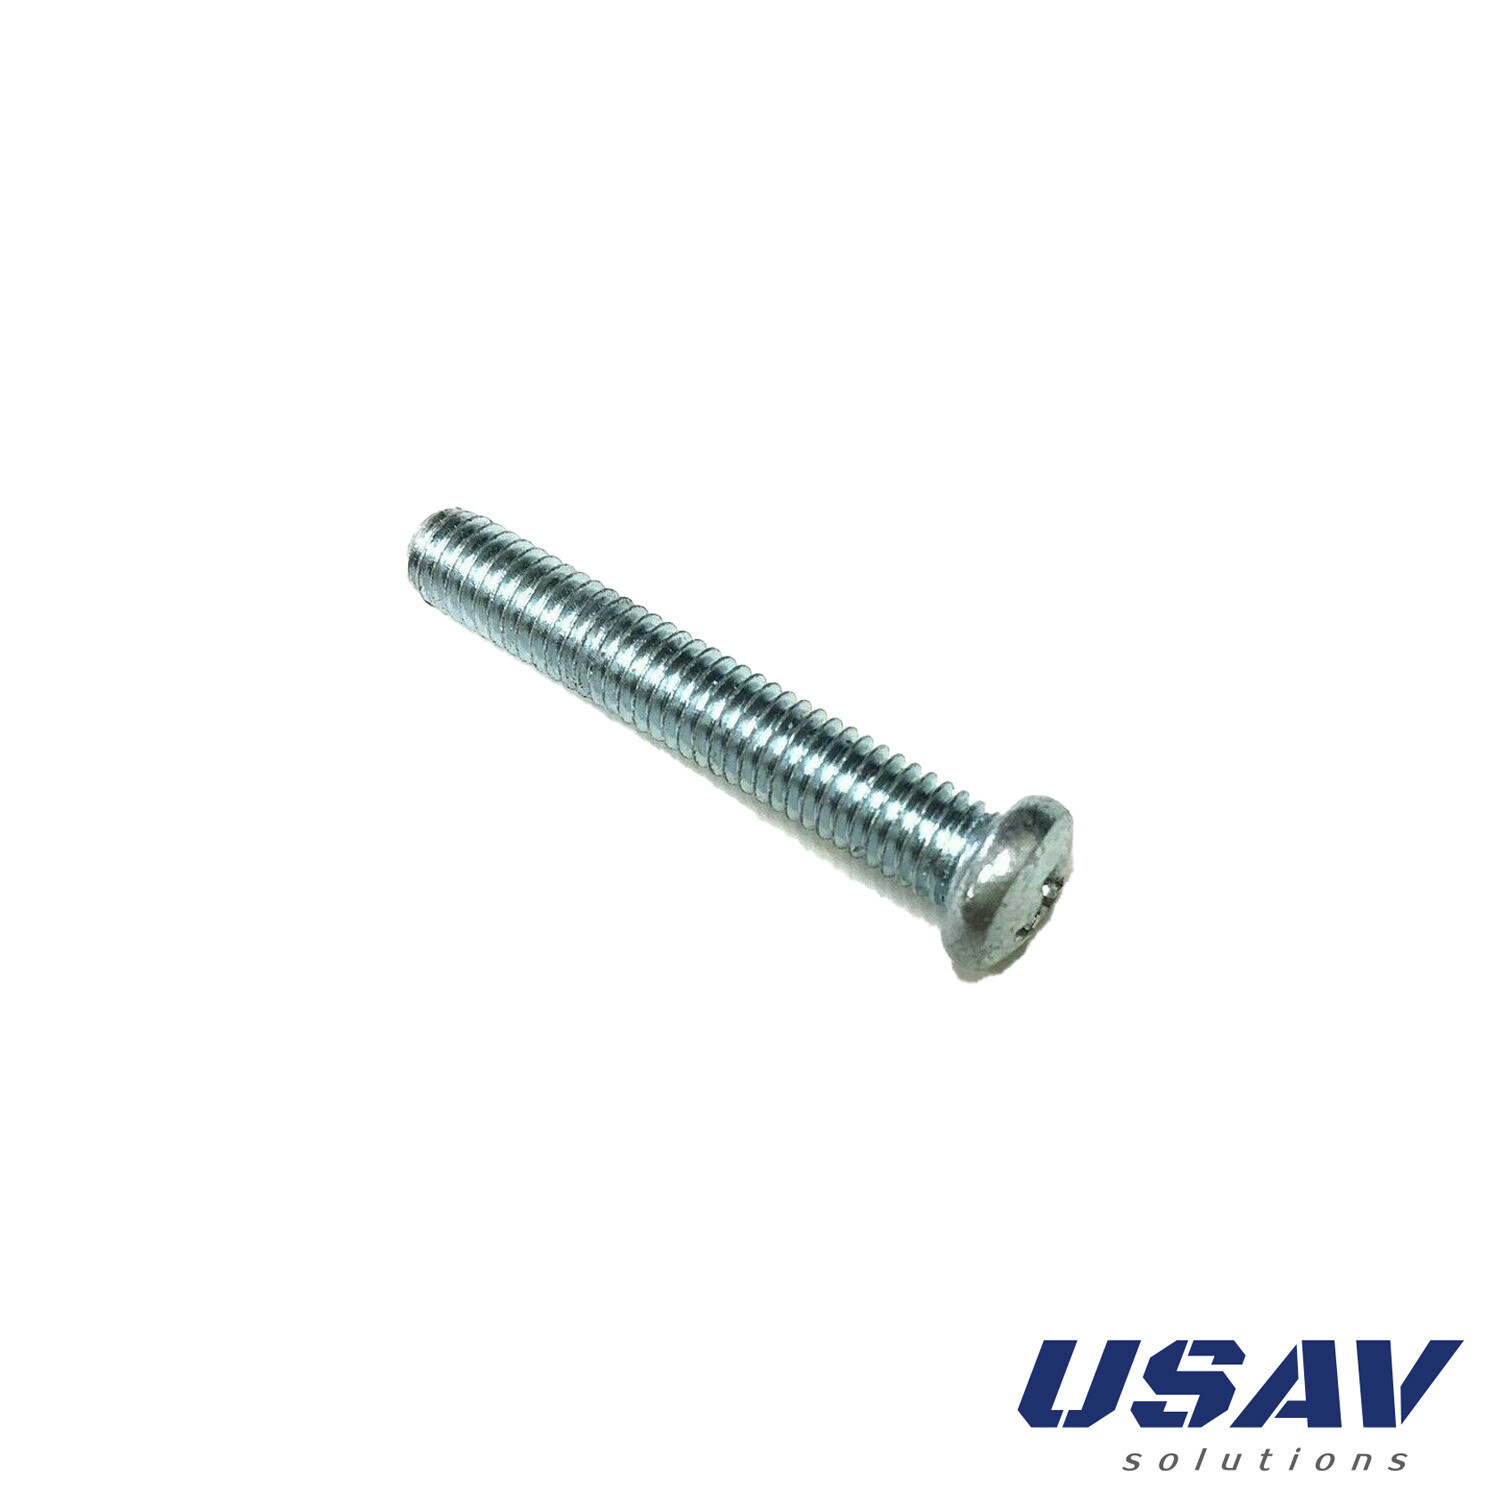 Mounting Screw for Bose Wall Mount / Bracket UB-20; fits Cube Speaker